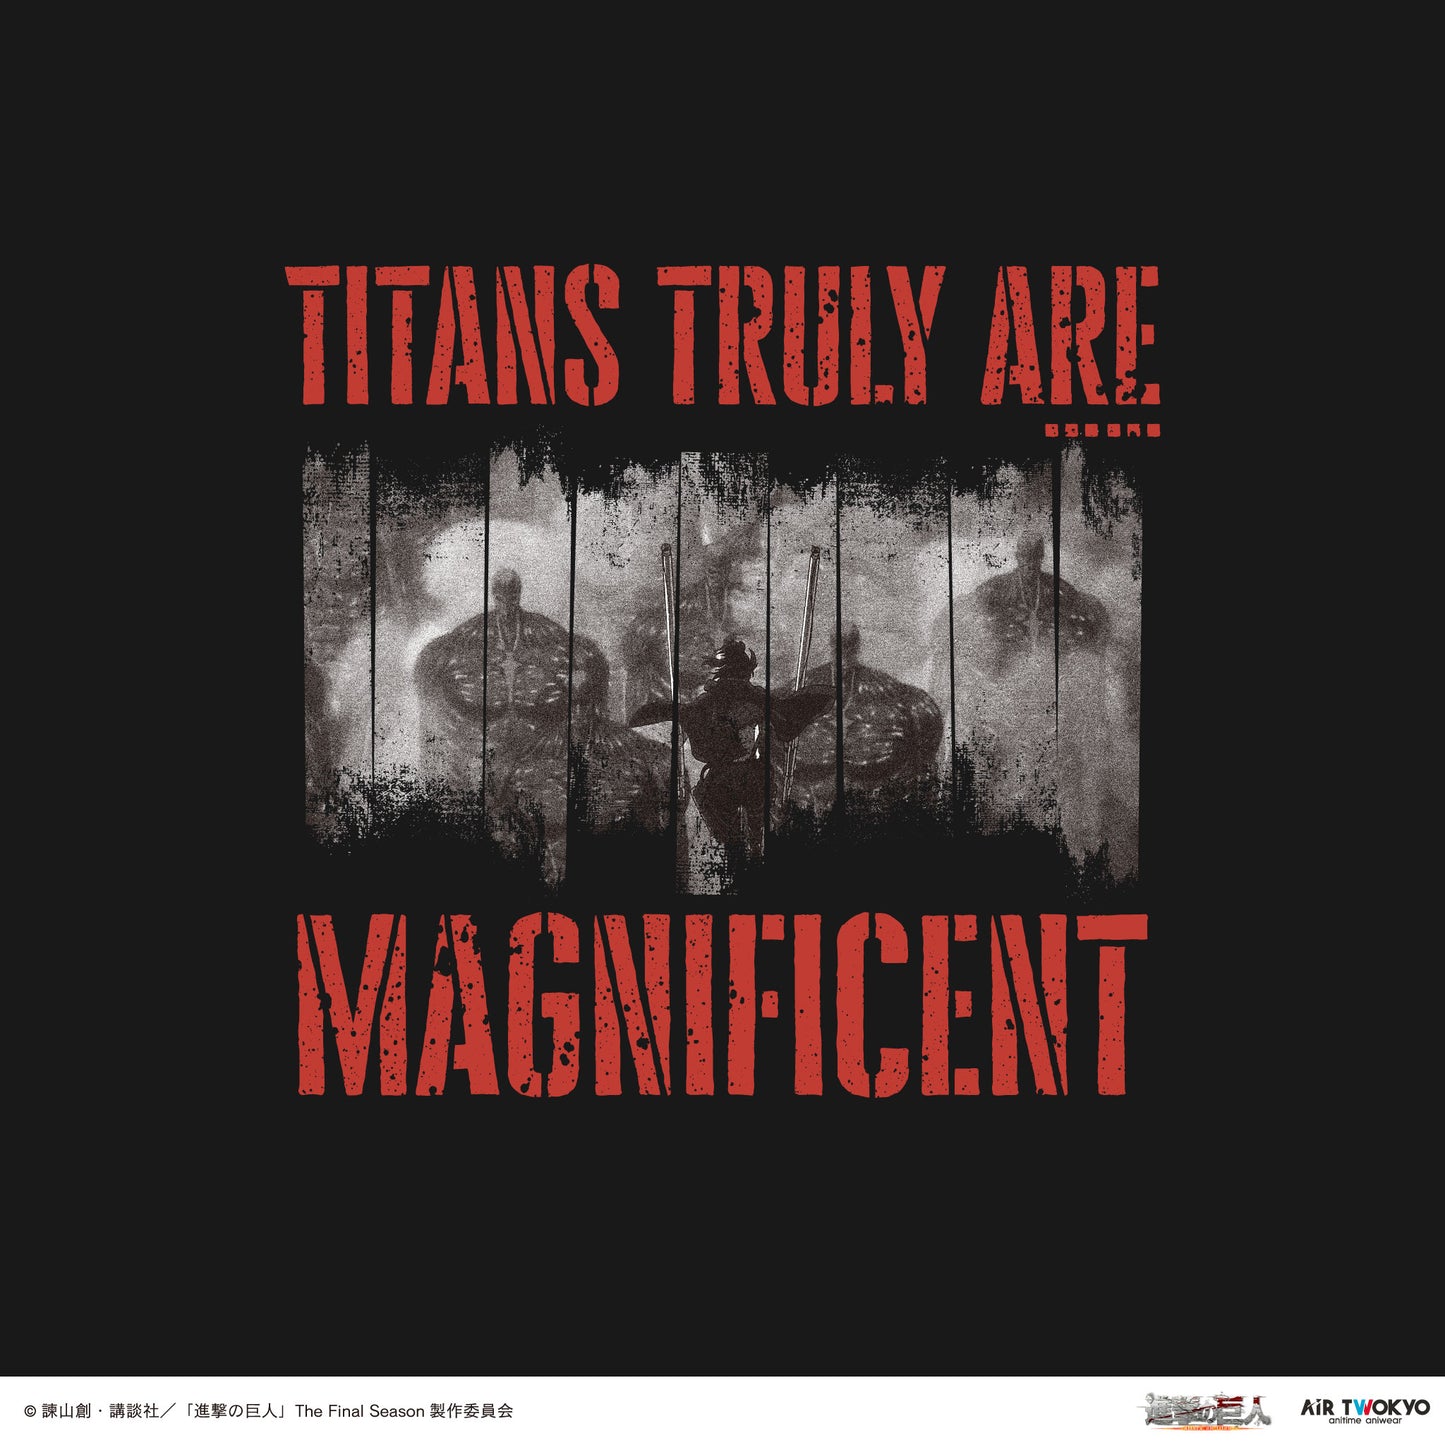 TV Anime "Attack on Titan" The Final Season Final(Part 1) Long sleeves TEE 2 (...Titans truly are...magnificent,)